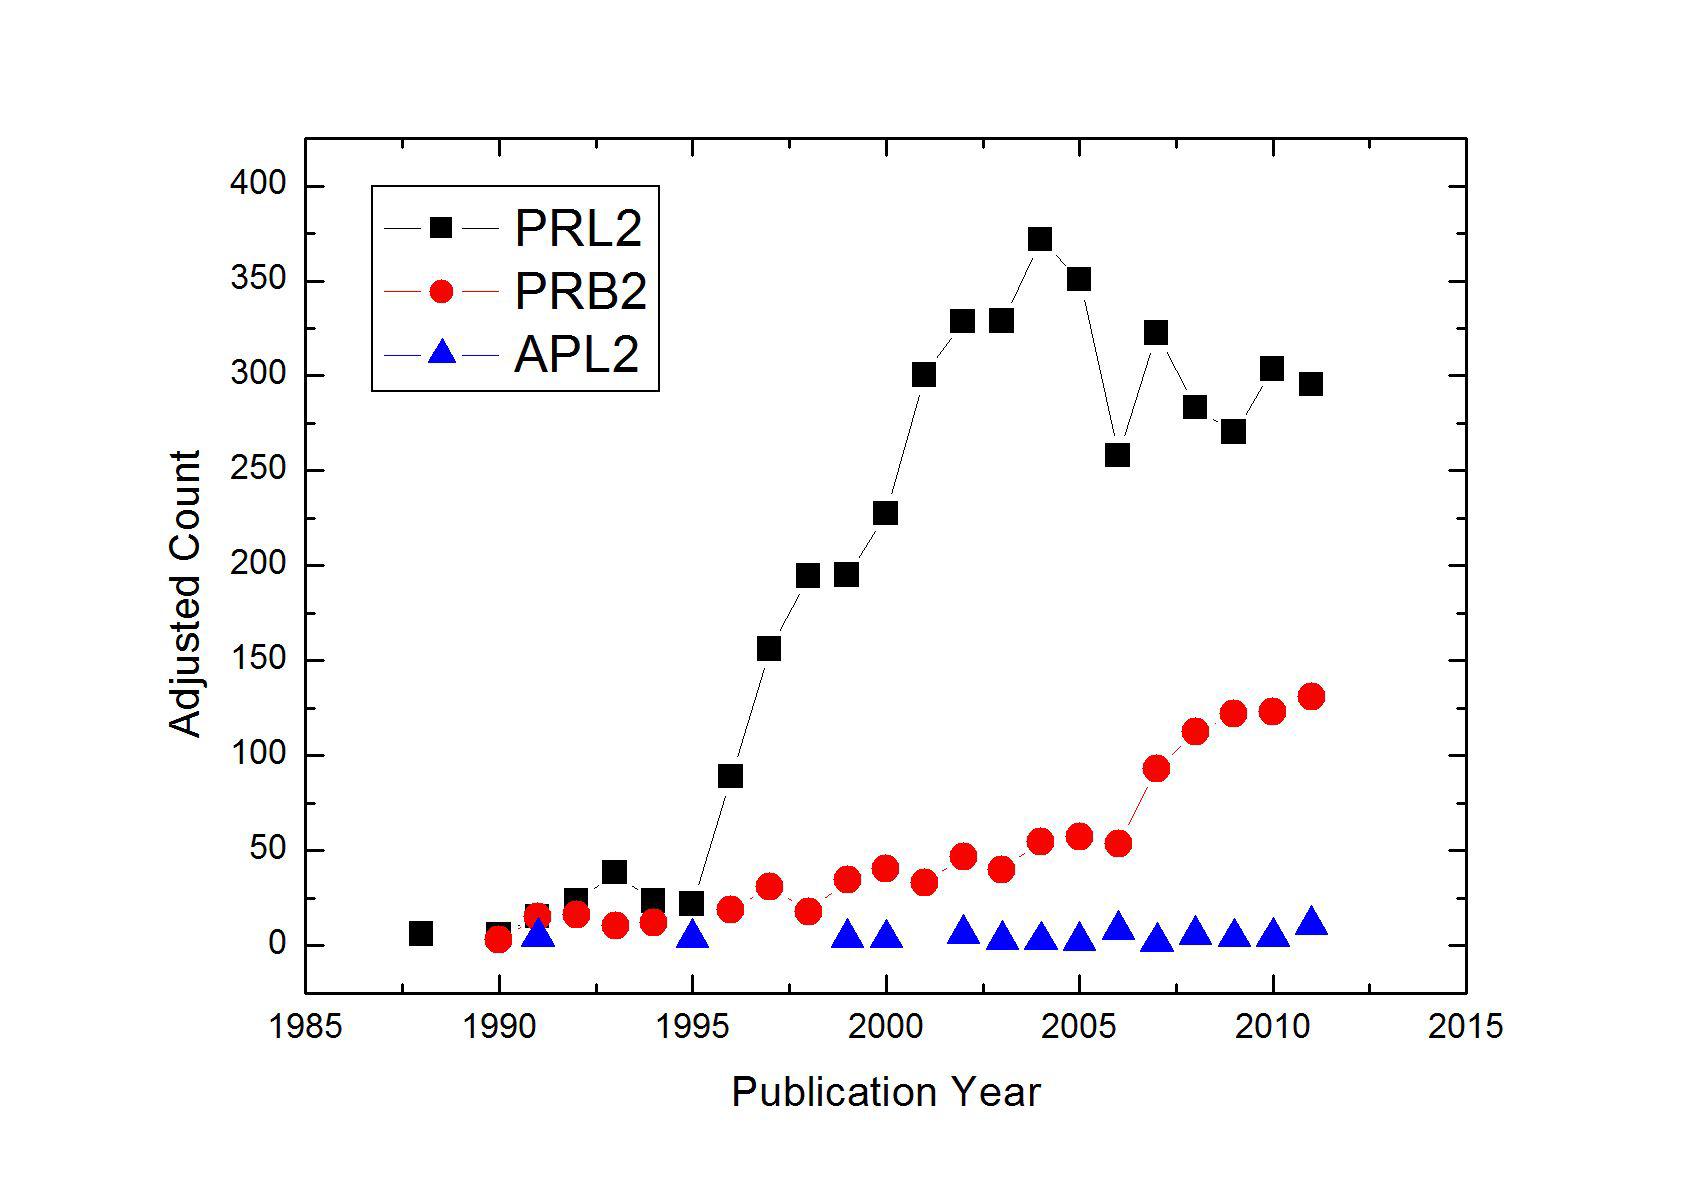 The adjusted number of papers published in PRL, PRB and APL in each year on Bose-Einstein.